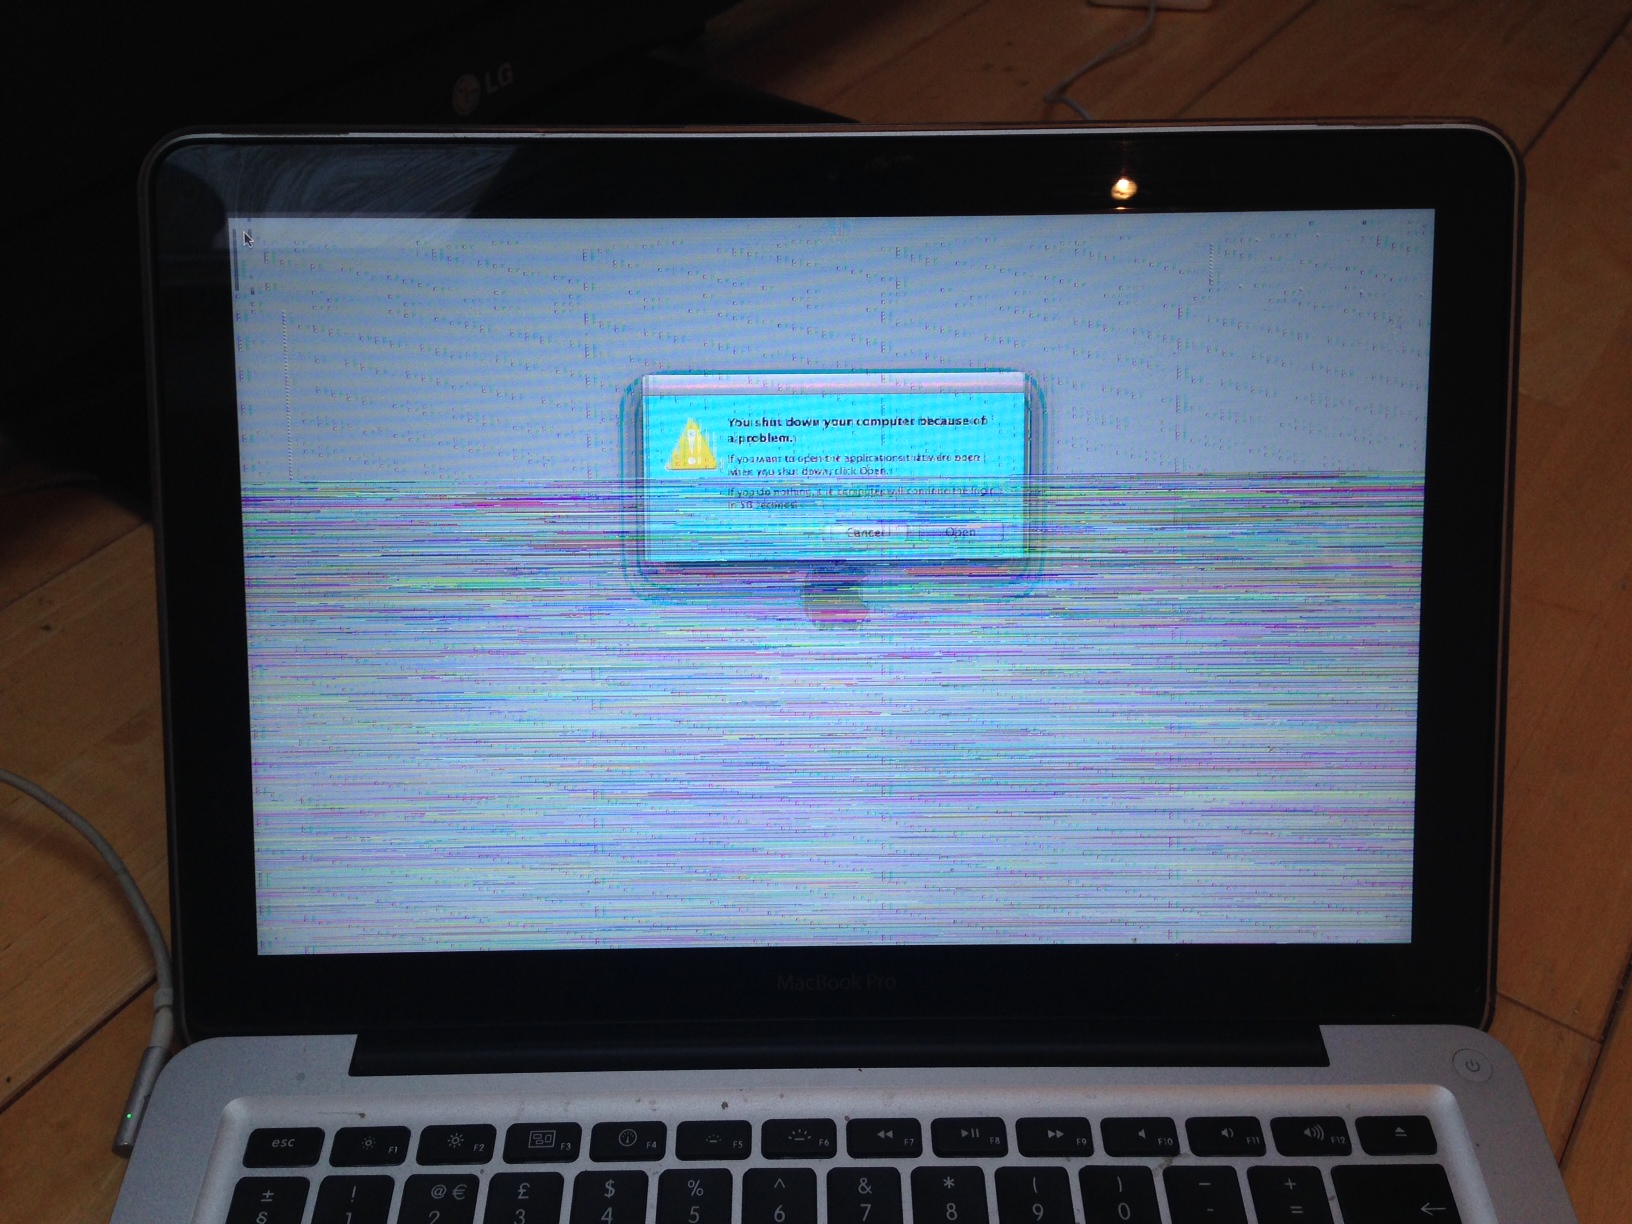 Specs apple macbook pro early 2011 crashes pce164p n03 ver 006